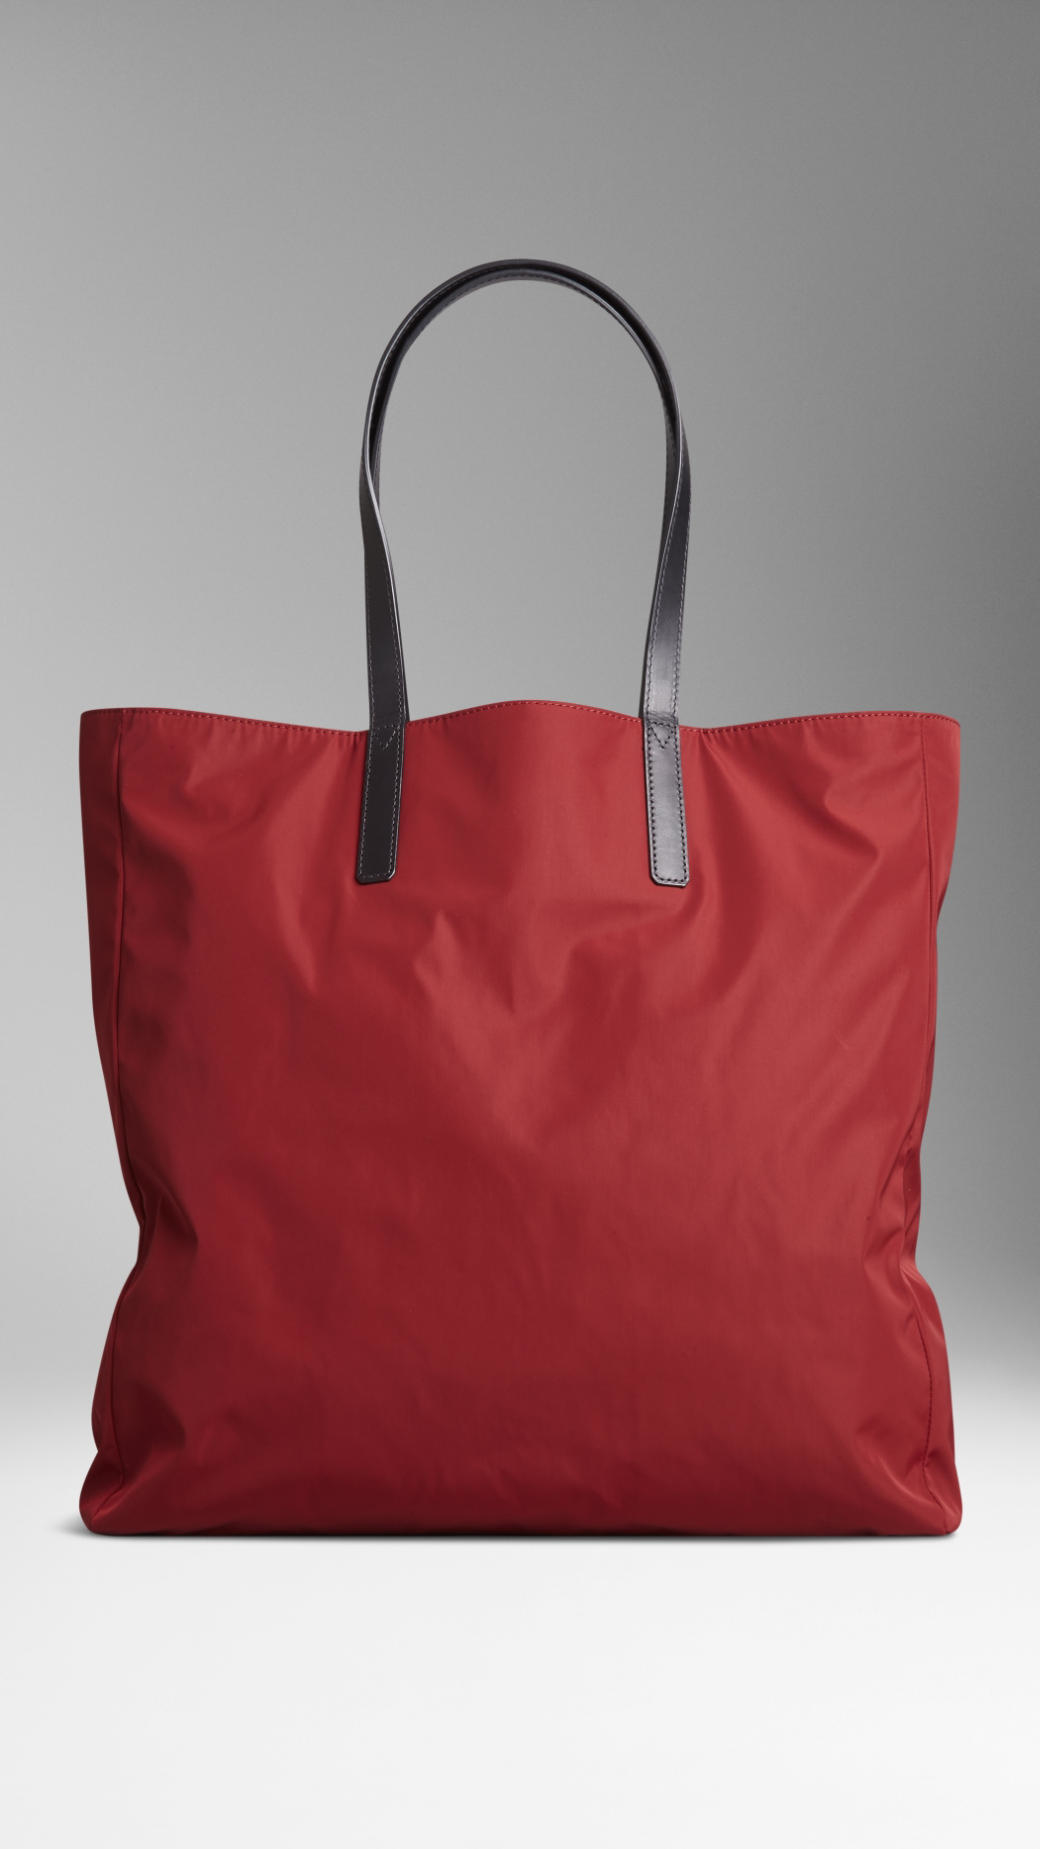 Burberry Reversible Lightweight Tote Bag in Red for Men - Lyst